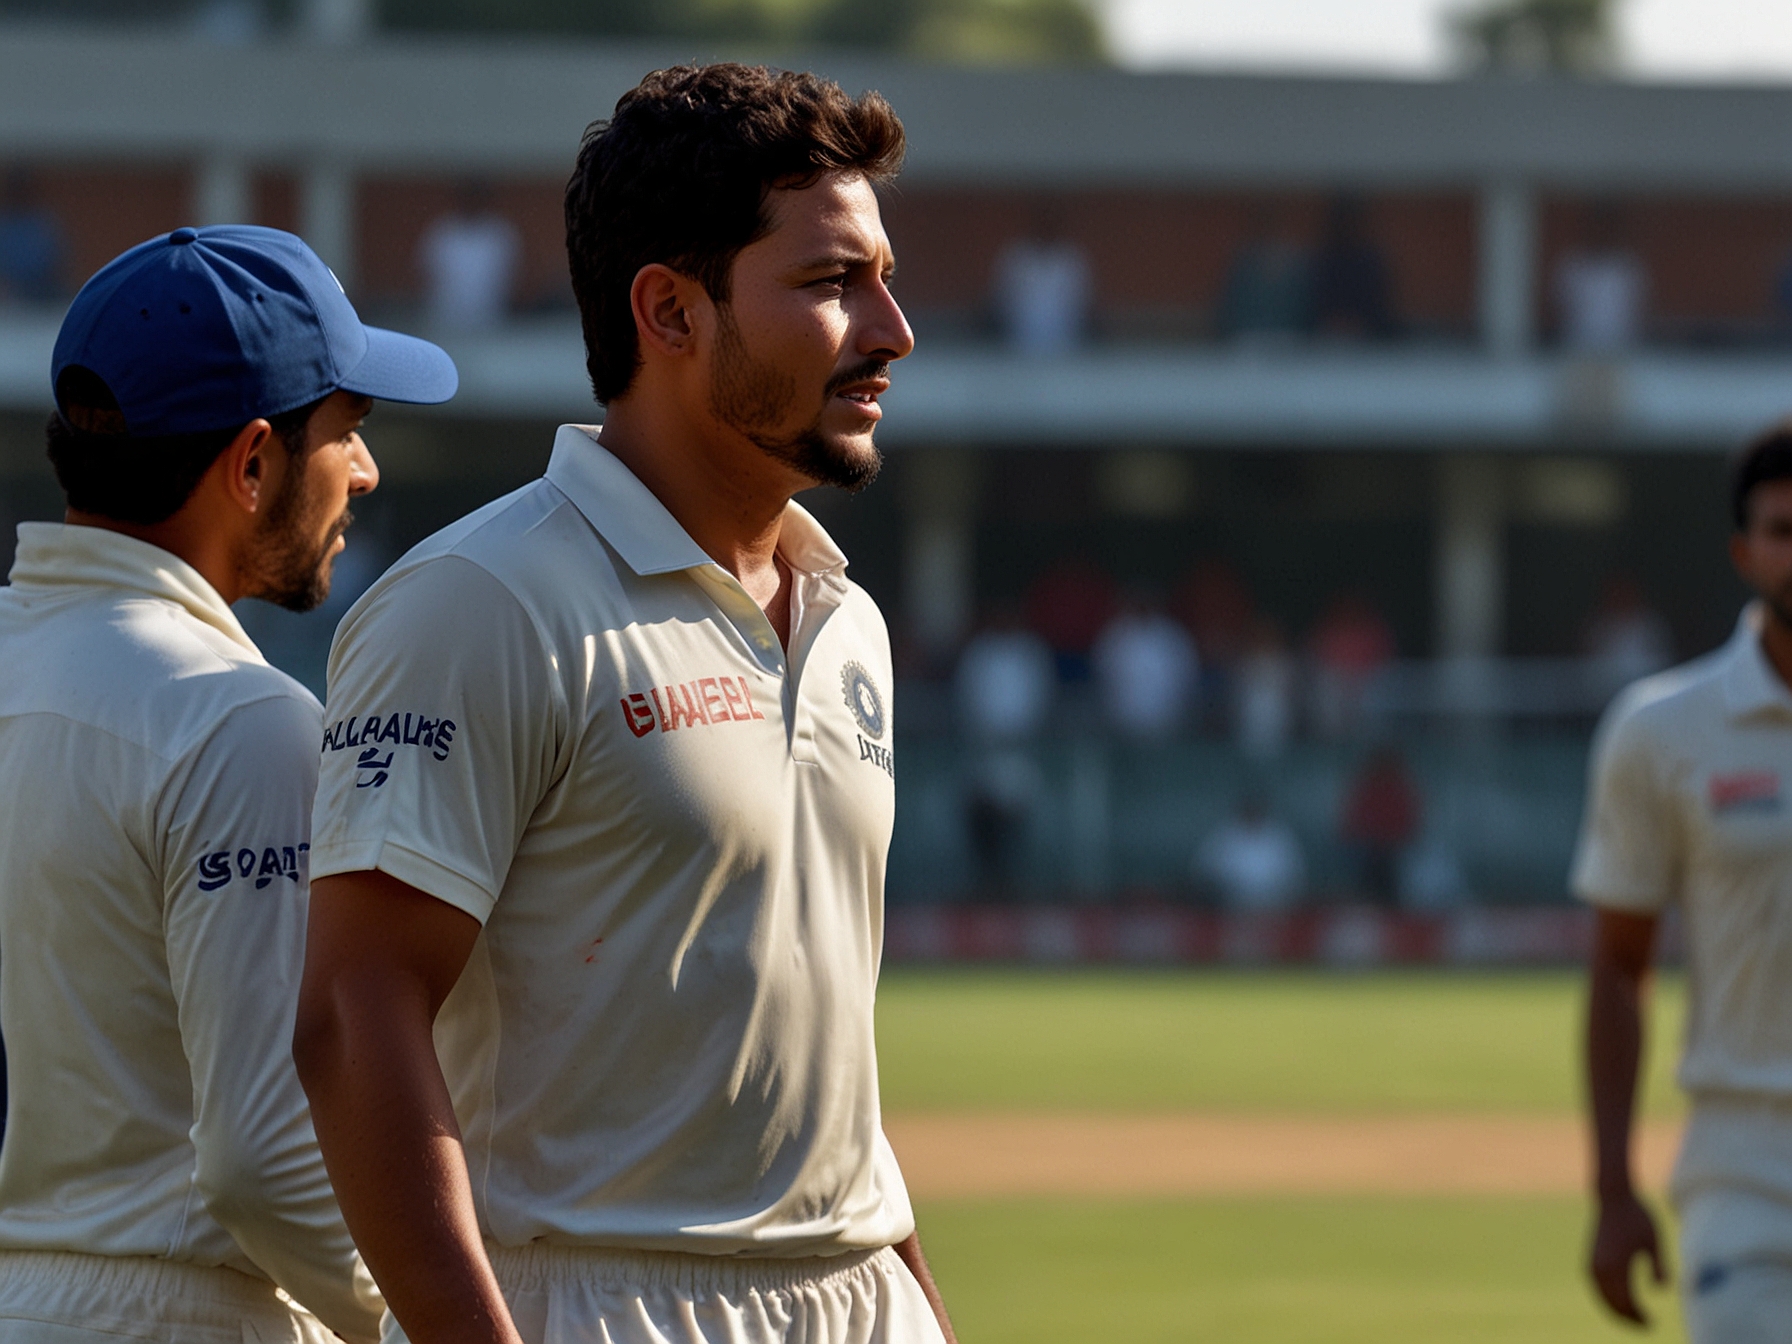 A close-up of Kuldeep Yadav strategizing with teammates on the field, highlighting his mental fortitude and camaraderie that make him an indispensable part of the Indian cricket team.